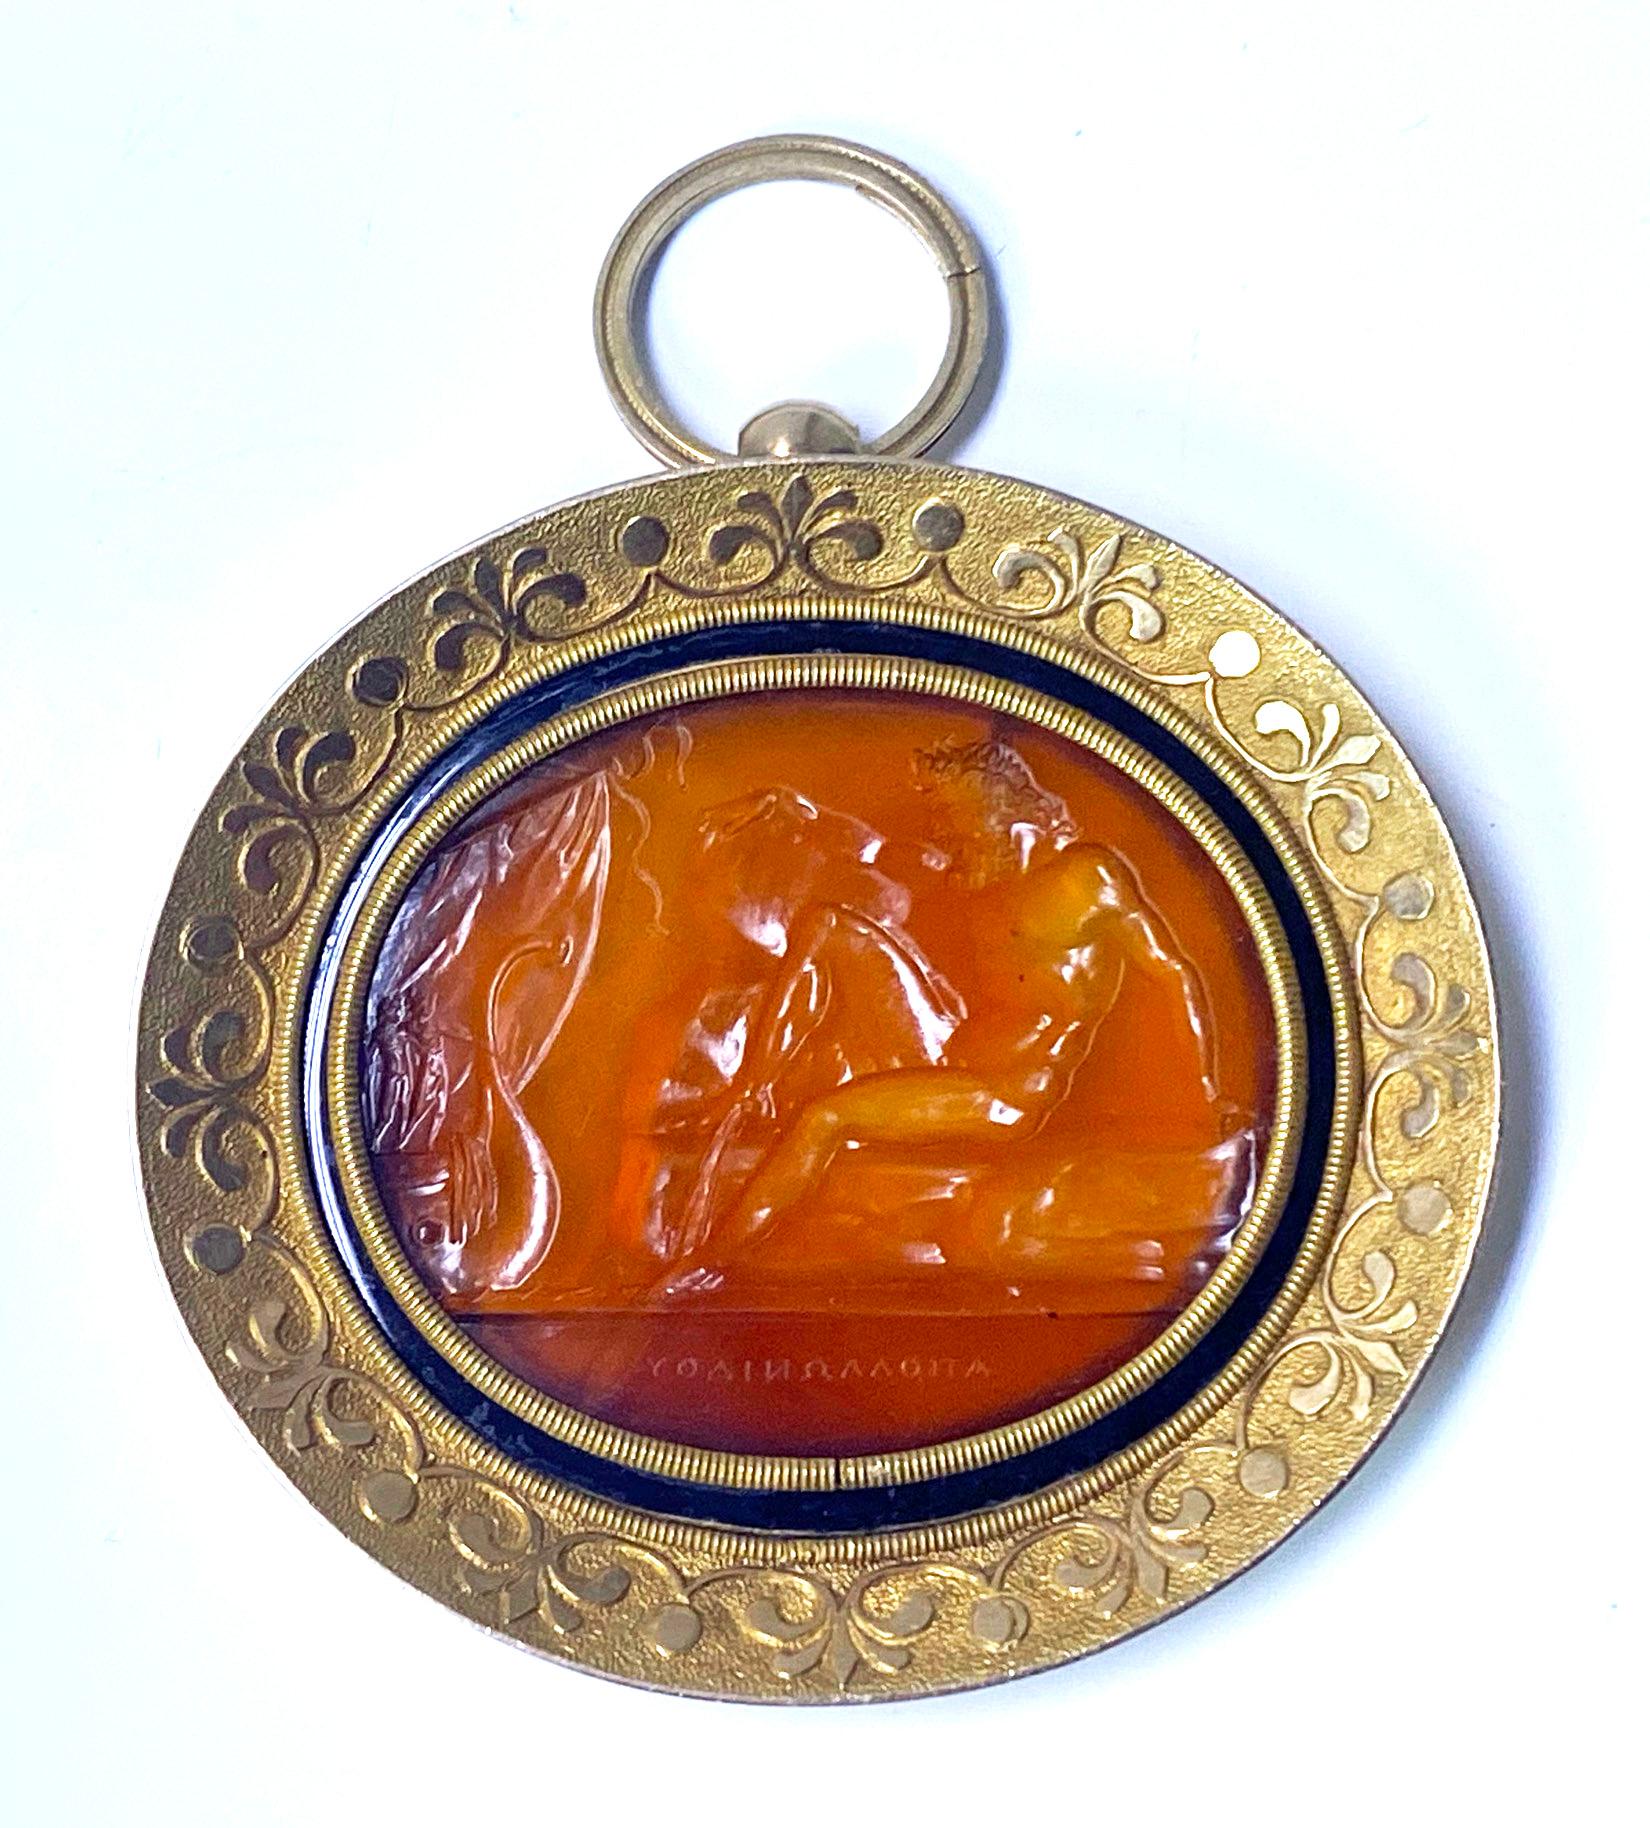 Sardonyx intaglio pendant in gold from the collection of Prince Stanislas Poniatowski (1754-1833). Outstanding carved scene of Polyphemus hurling a rock at the ship of Ulysses. Details are very clear. Signed in Greek letters at the bottom,